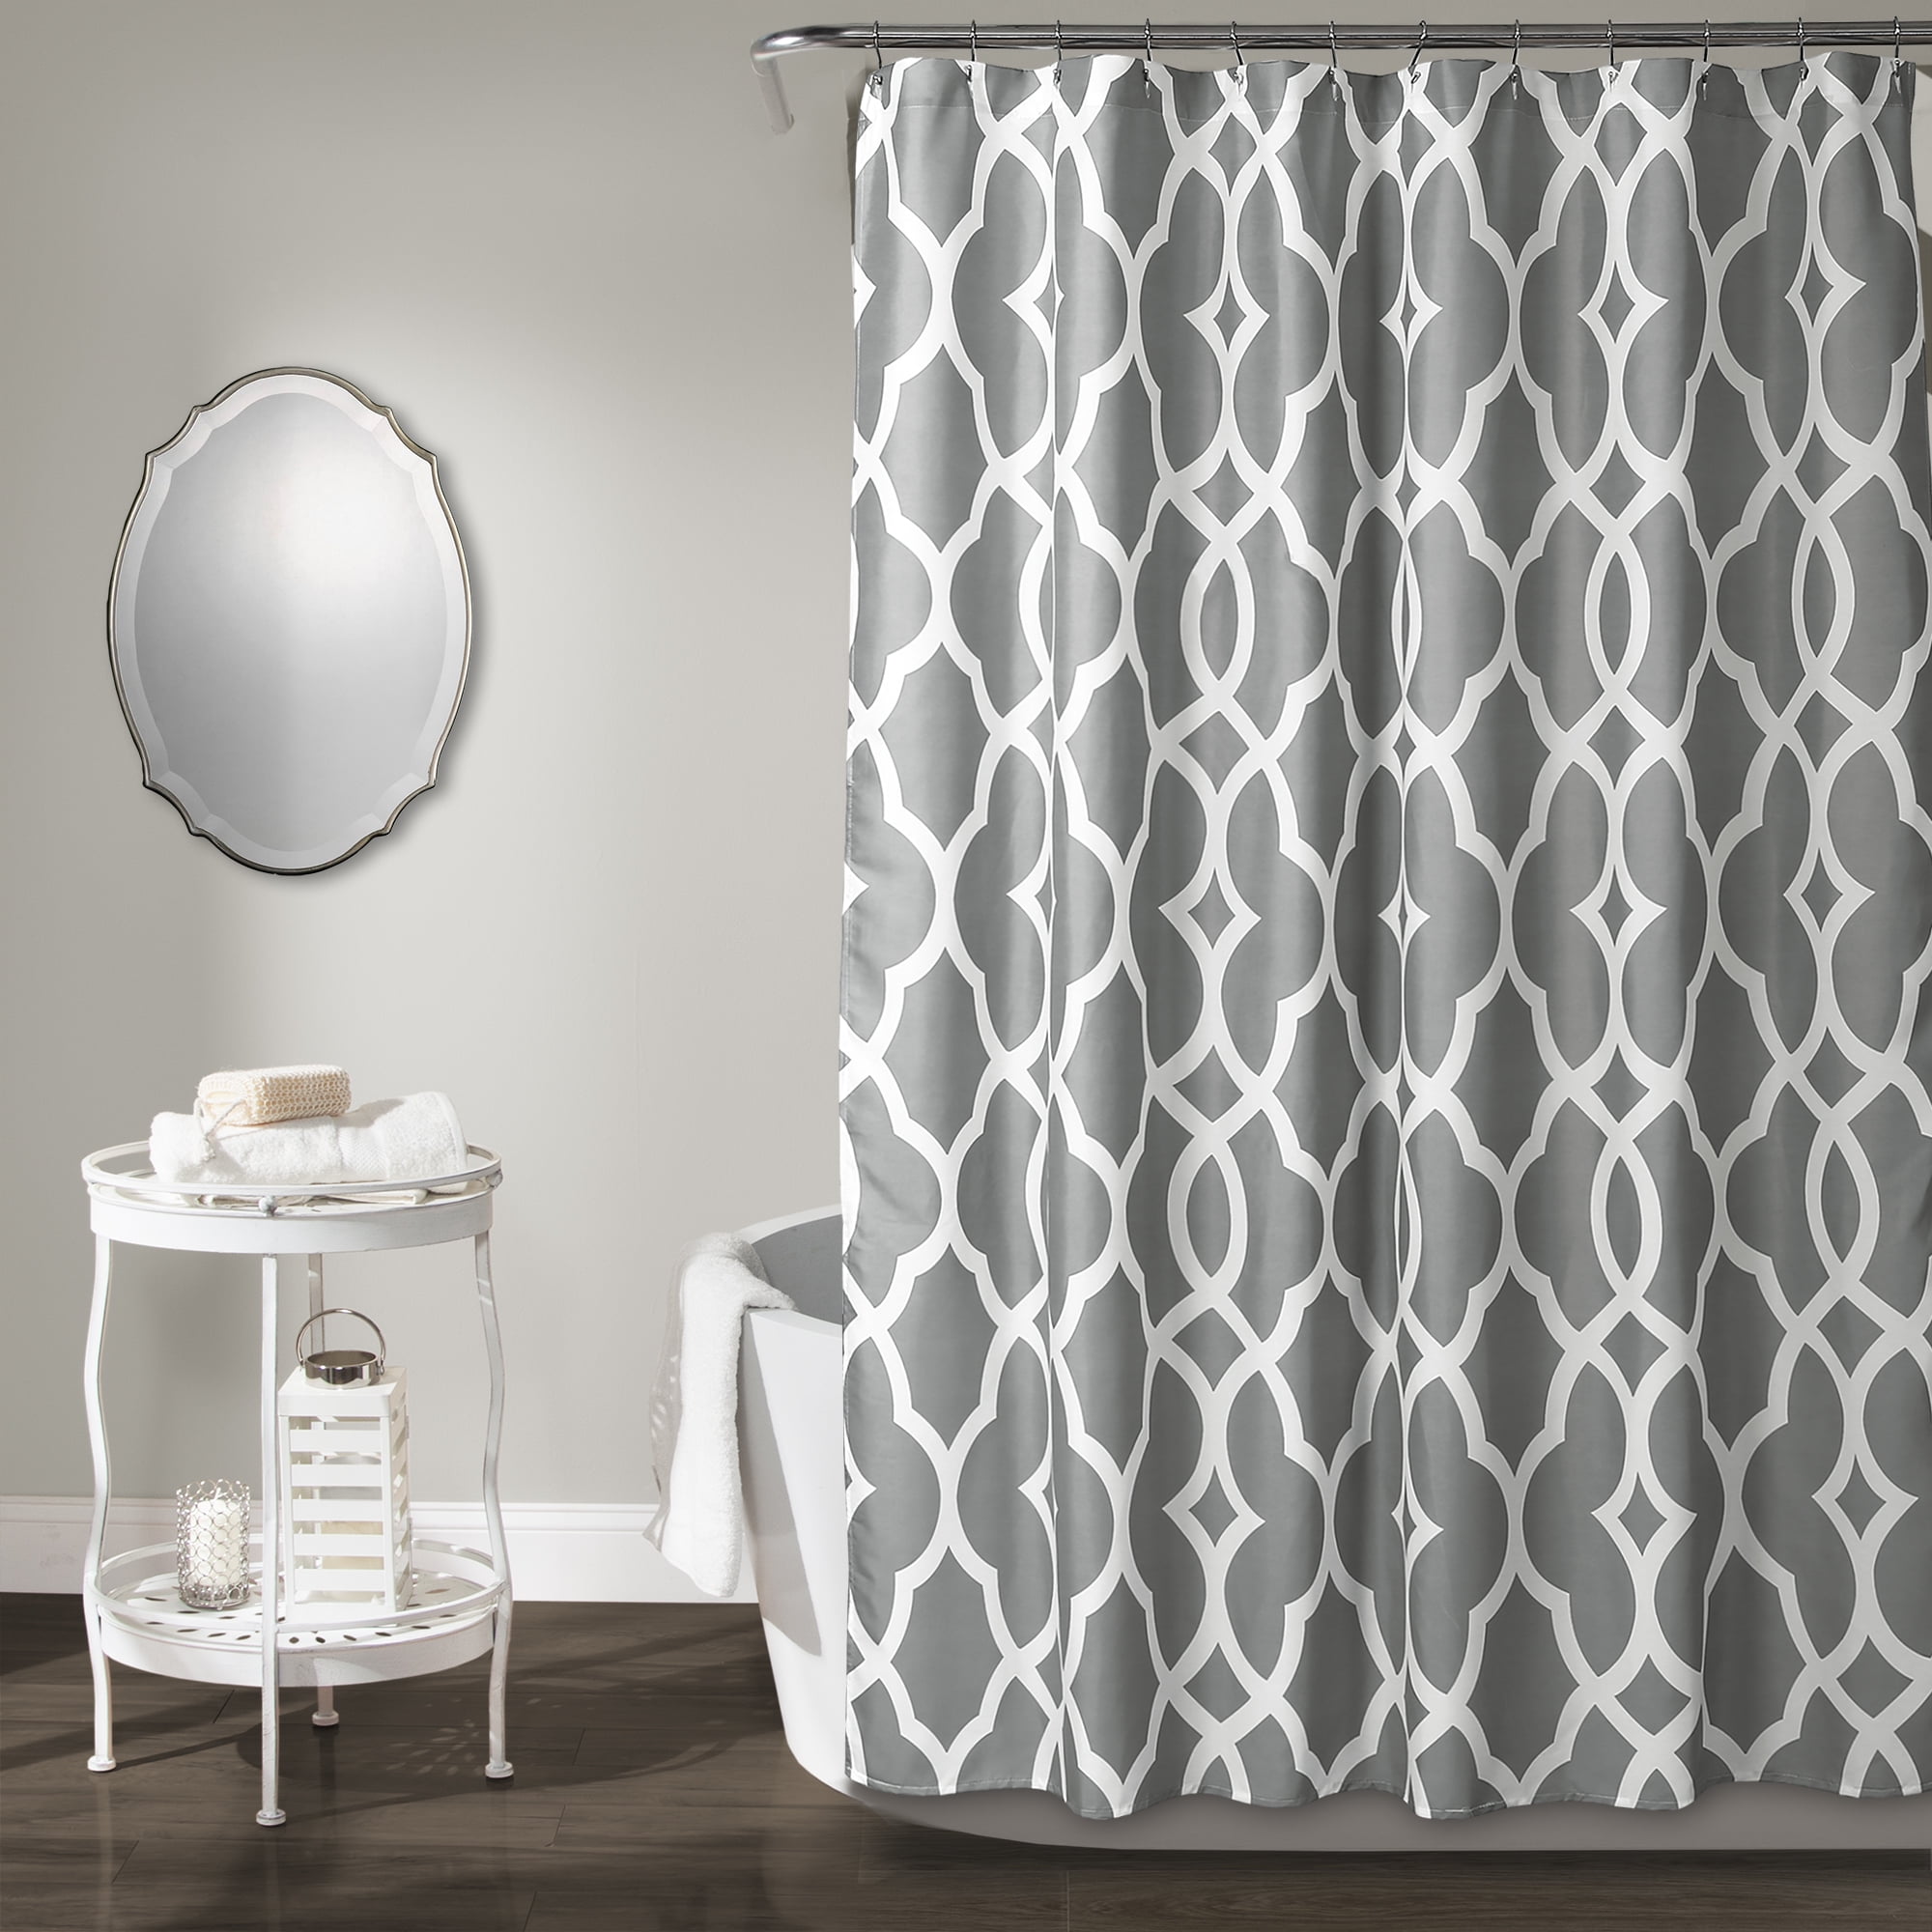 Lush Decor Connor Geo Polyester Shower, Gray And White Geometric Shower Curtain